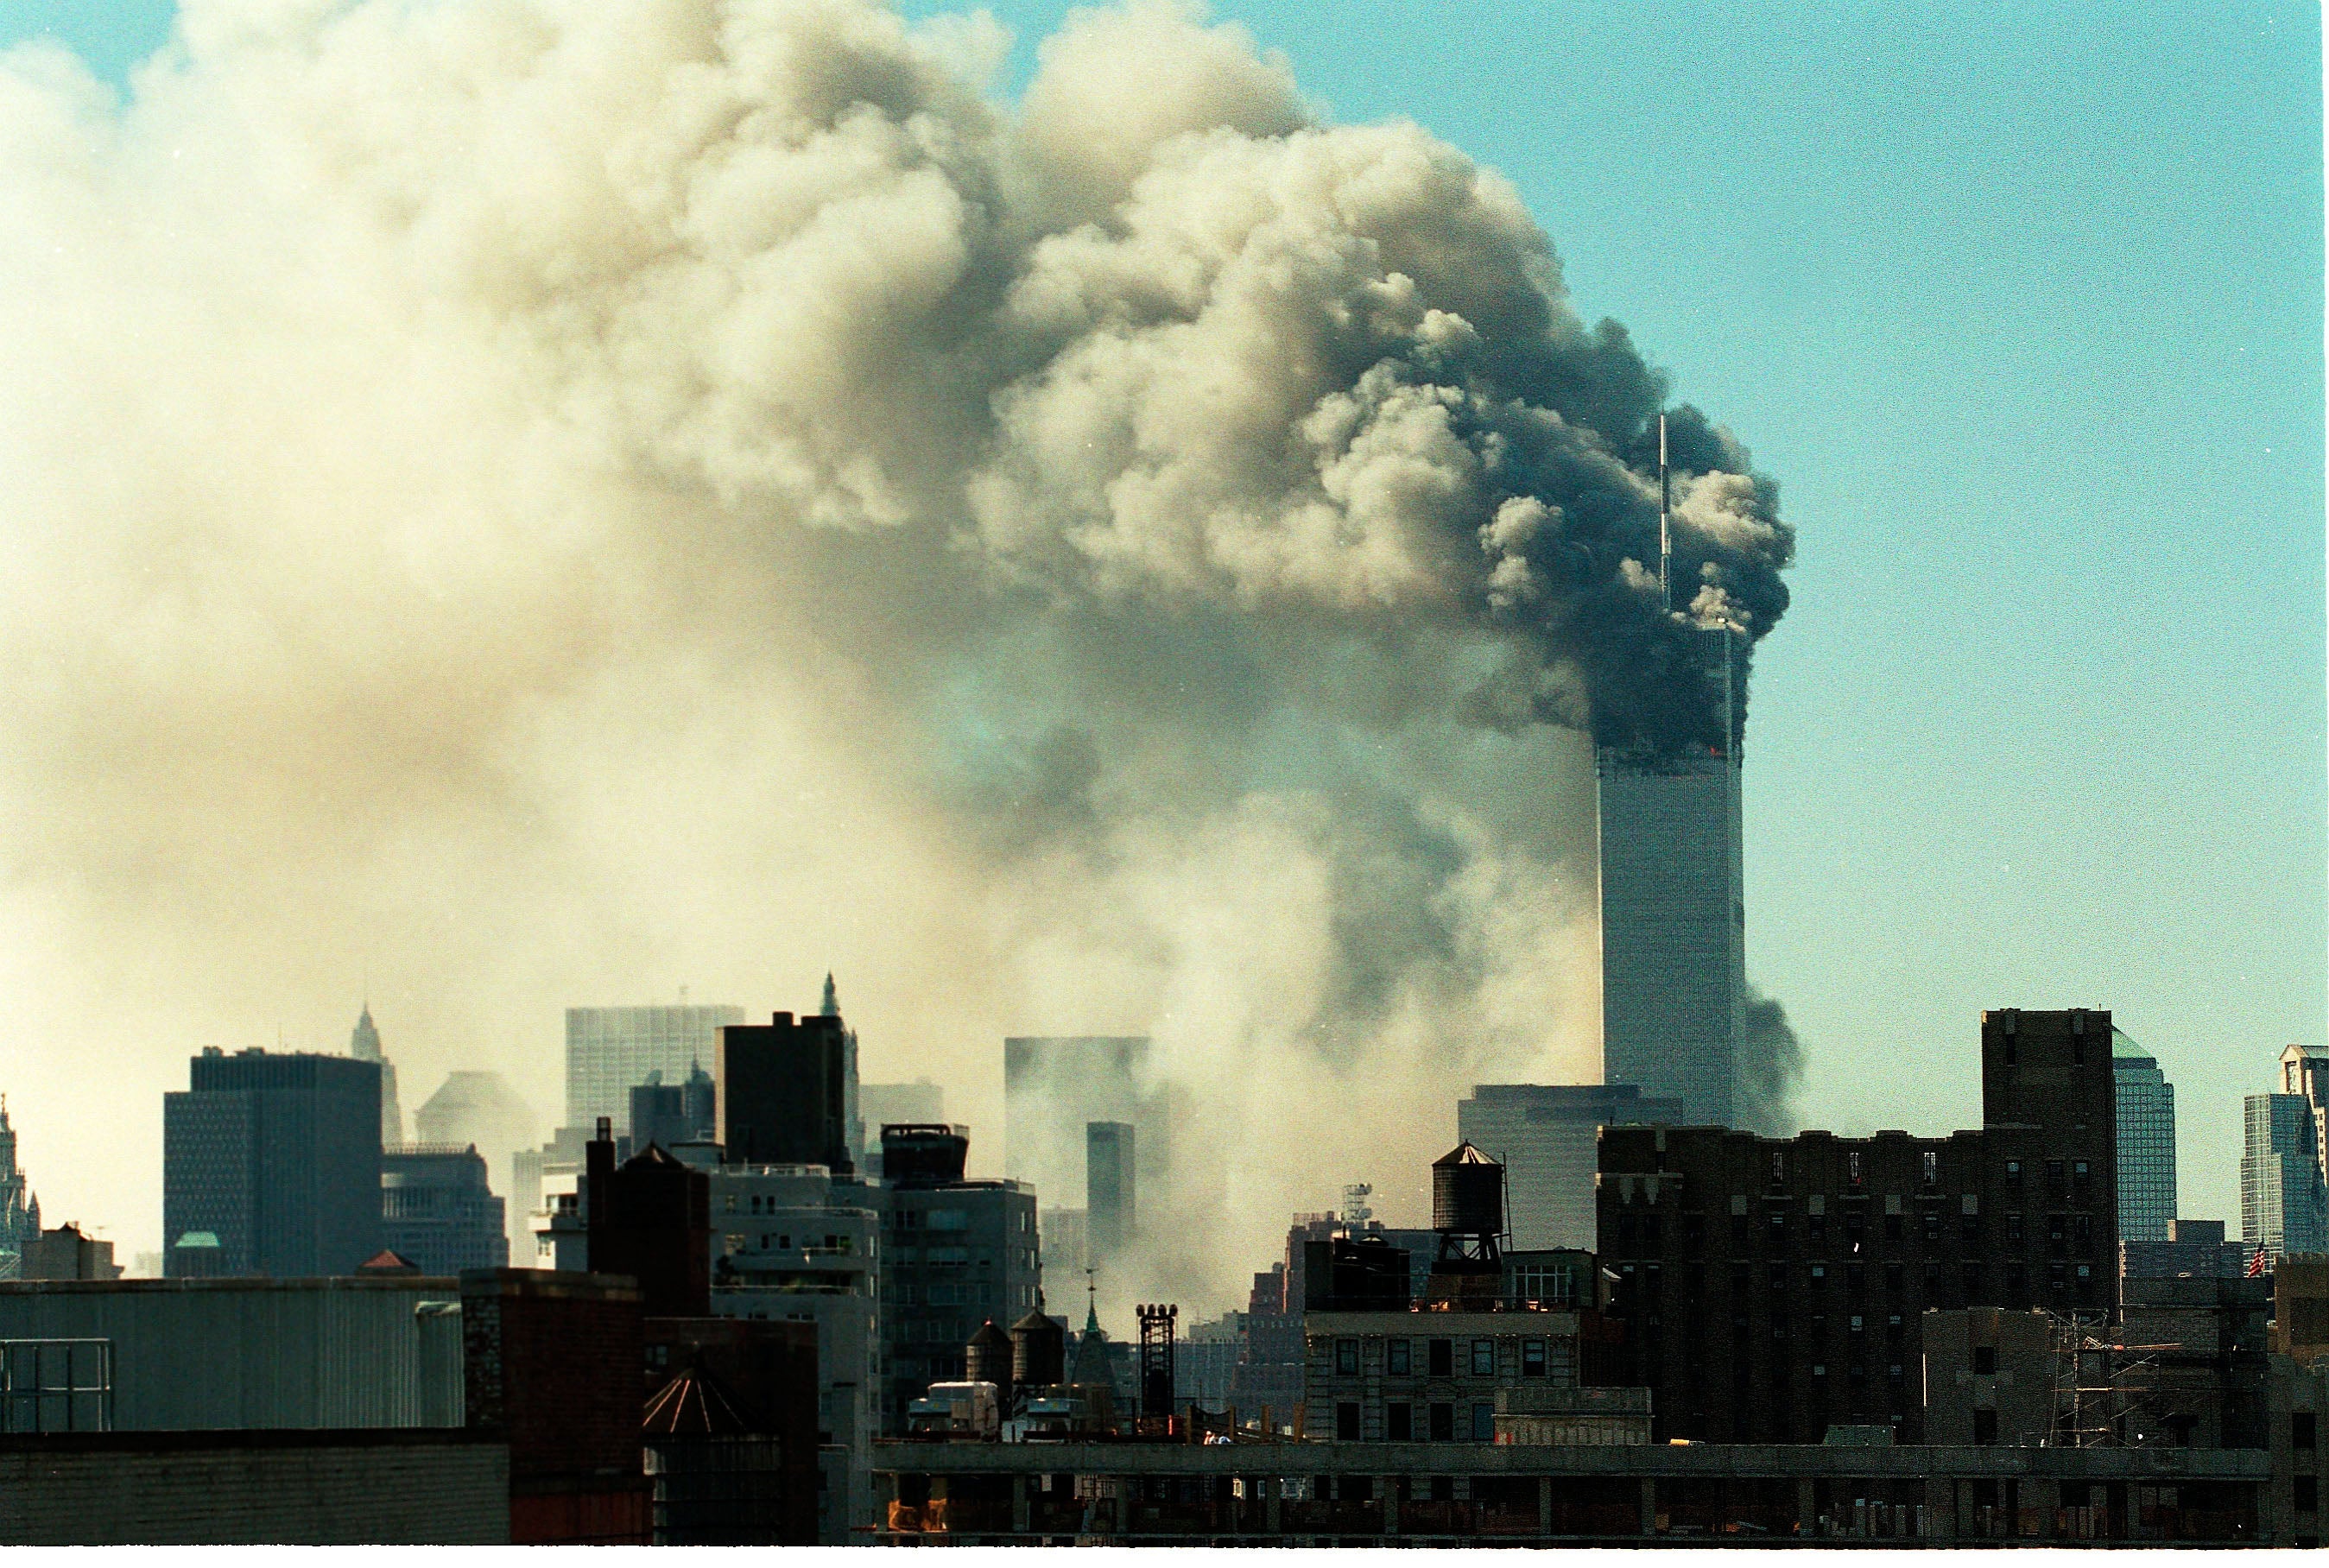 It has been 20 years since the terror attacks on the Twin Towers in New York